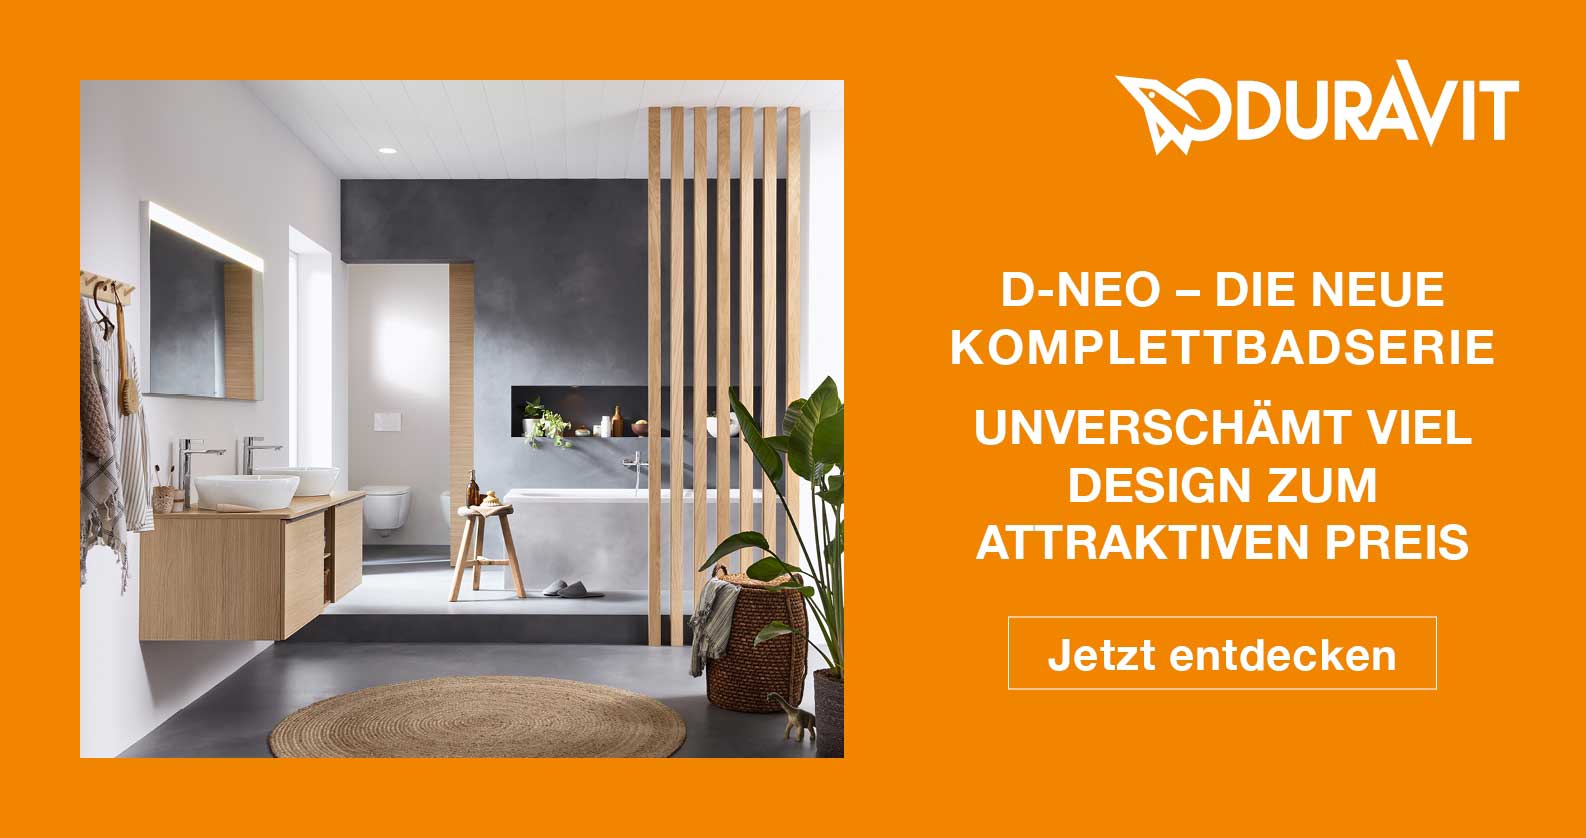 Duravit D-Neo at xTWOstore